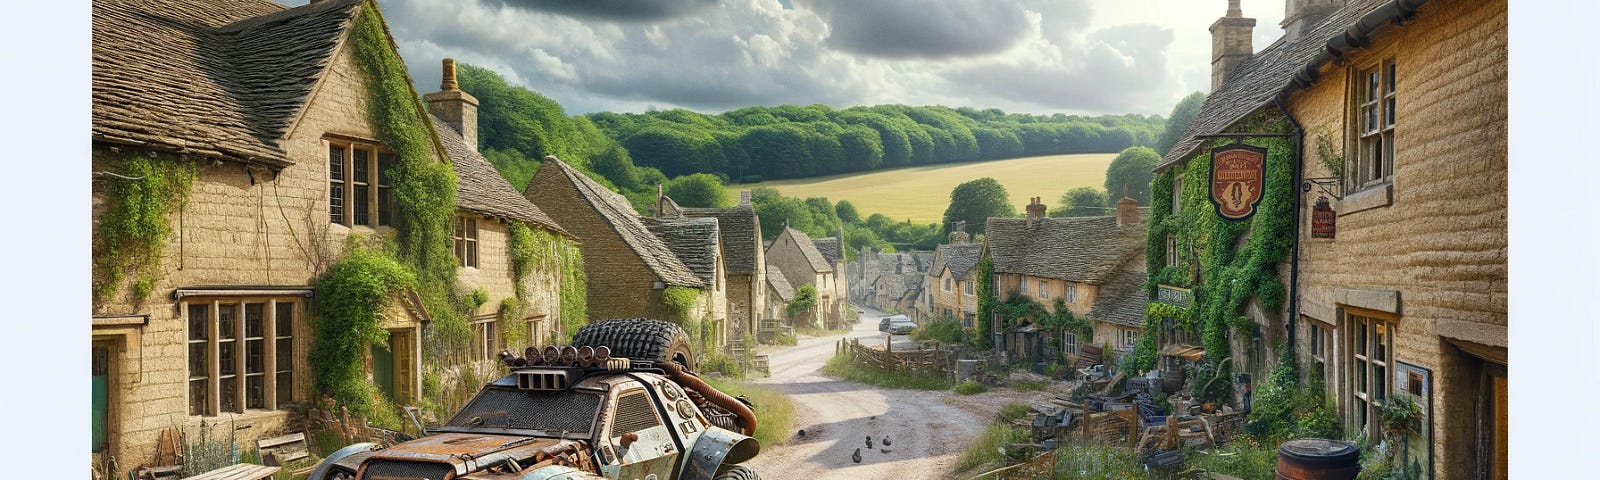 ChatGPT and DALL-E generated image of a post-apocalyptic car in an idyllic British village.